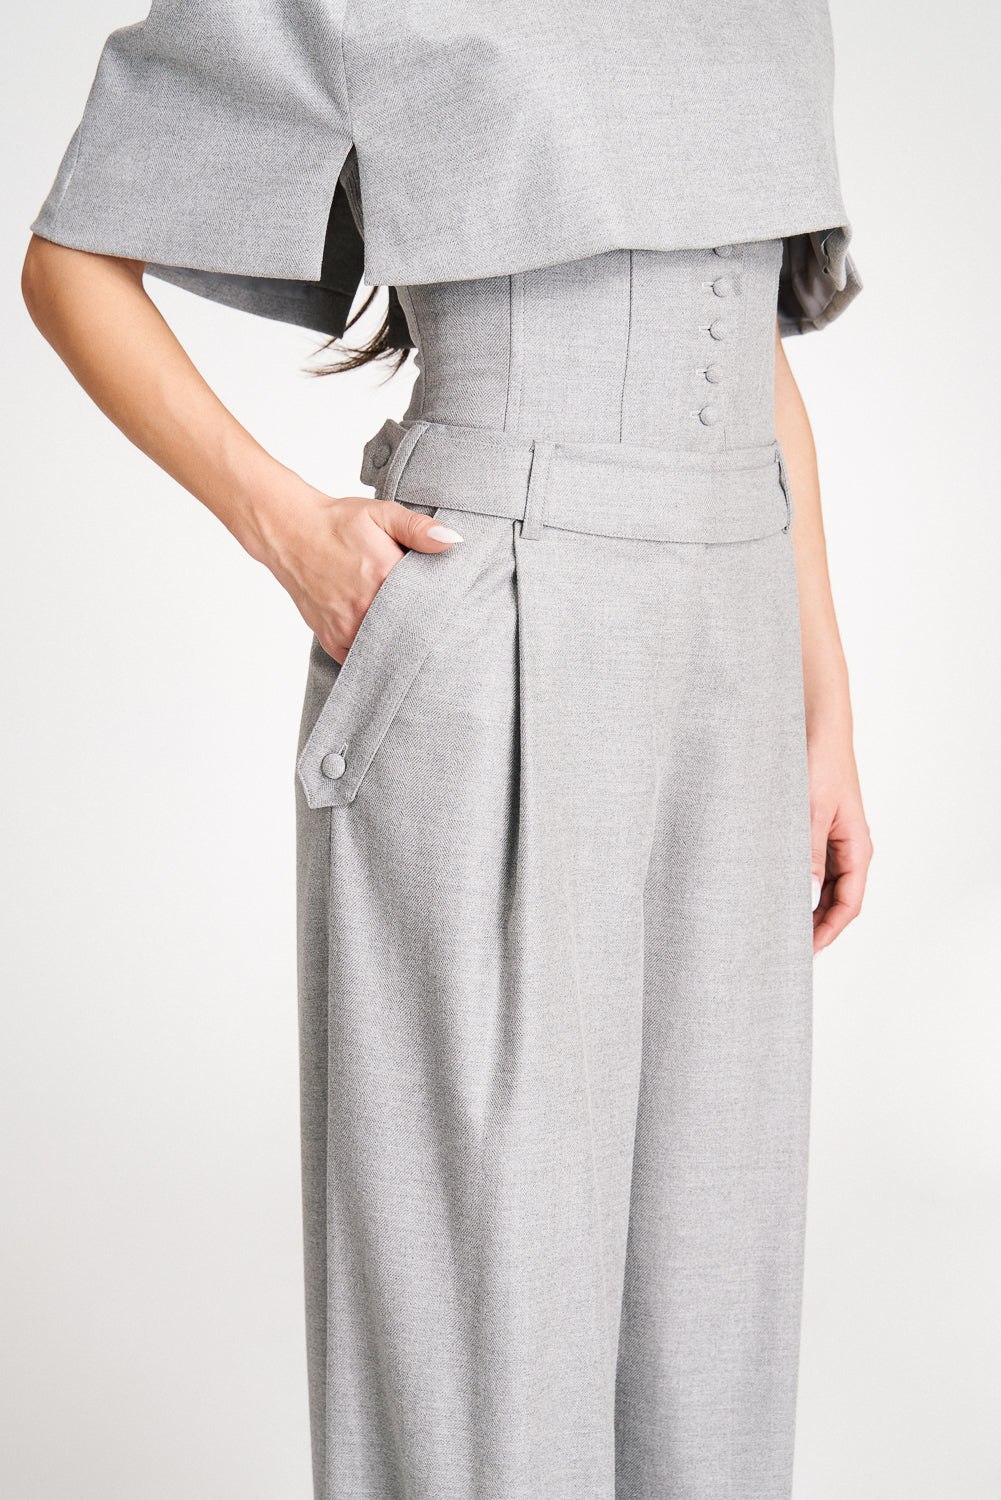 'Tammy' Pleated Wide-Leg Corset Trousers